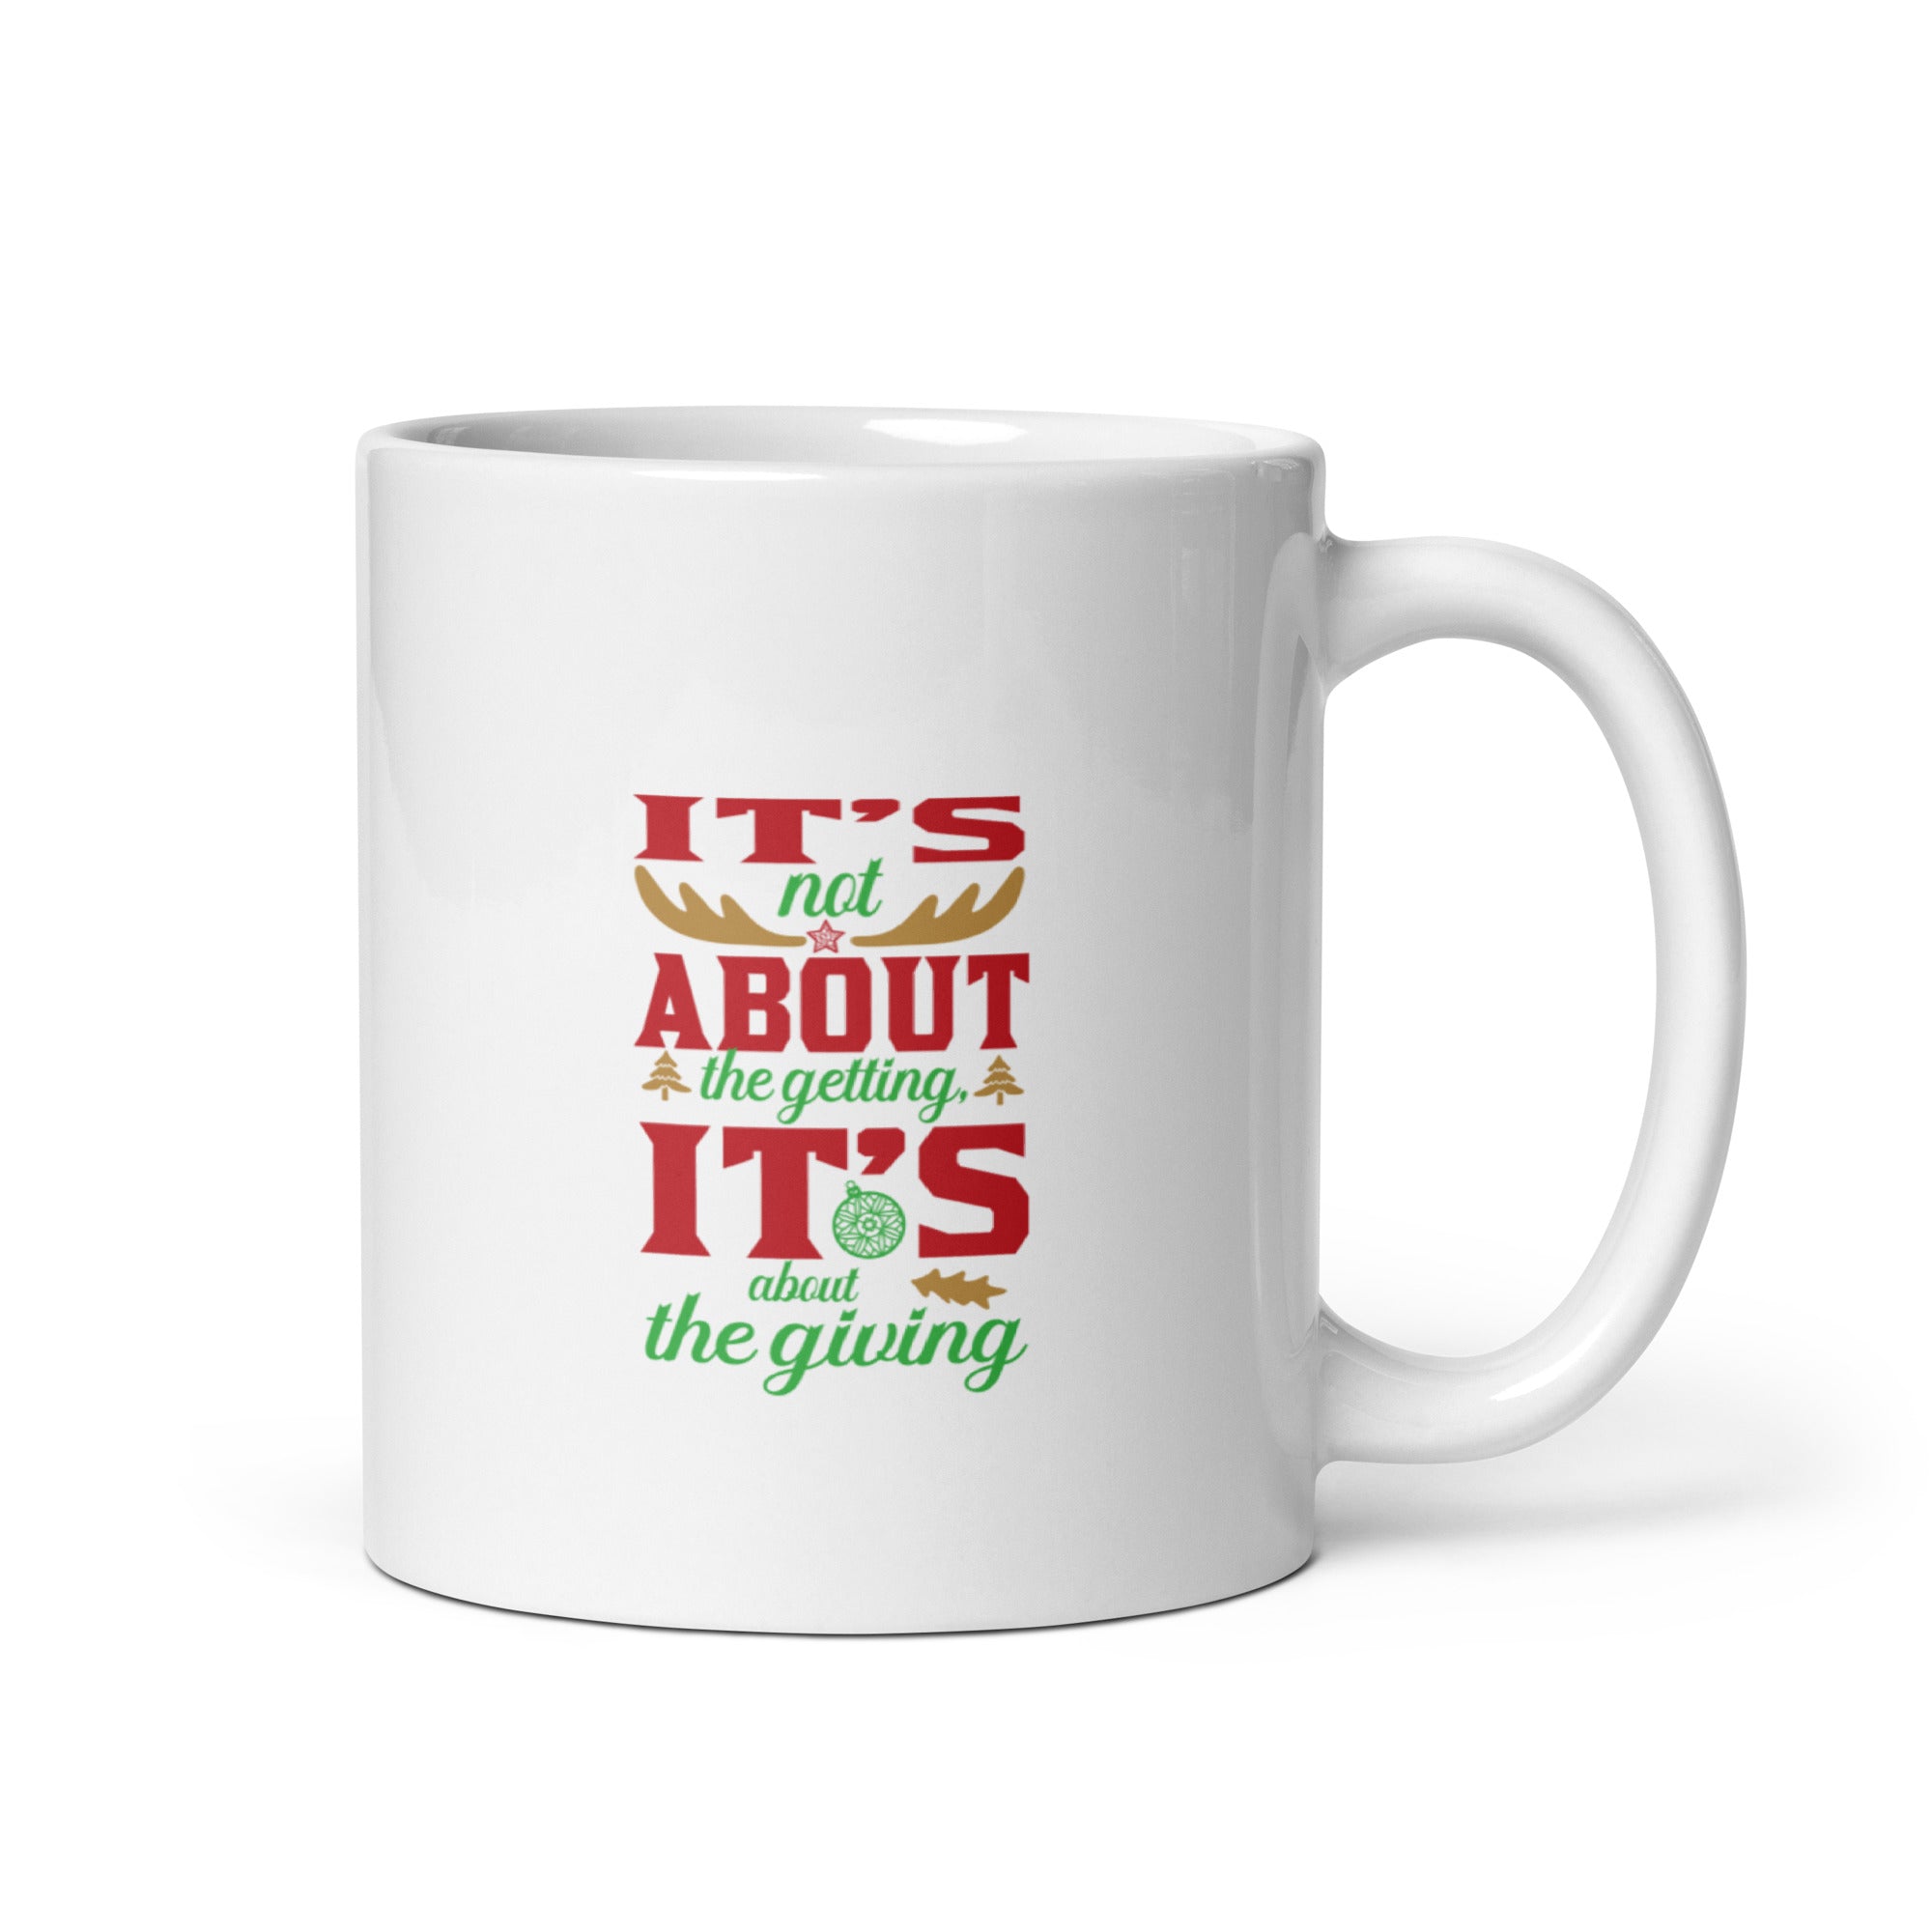 It's About The Giving - White glossy mug